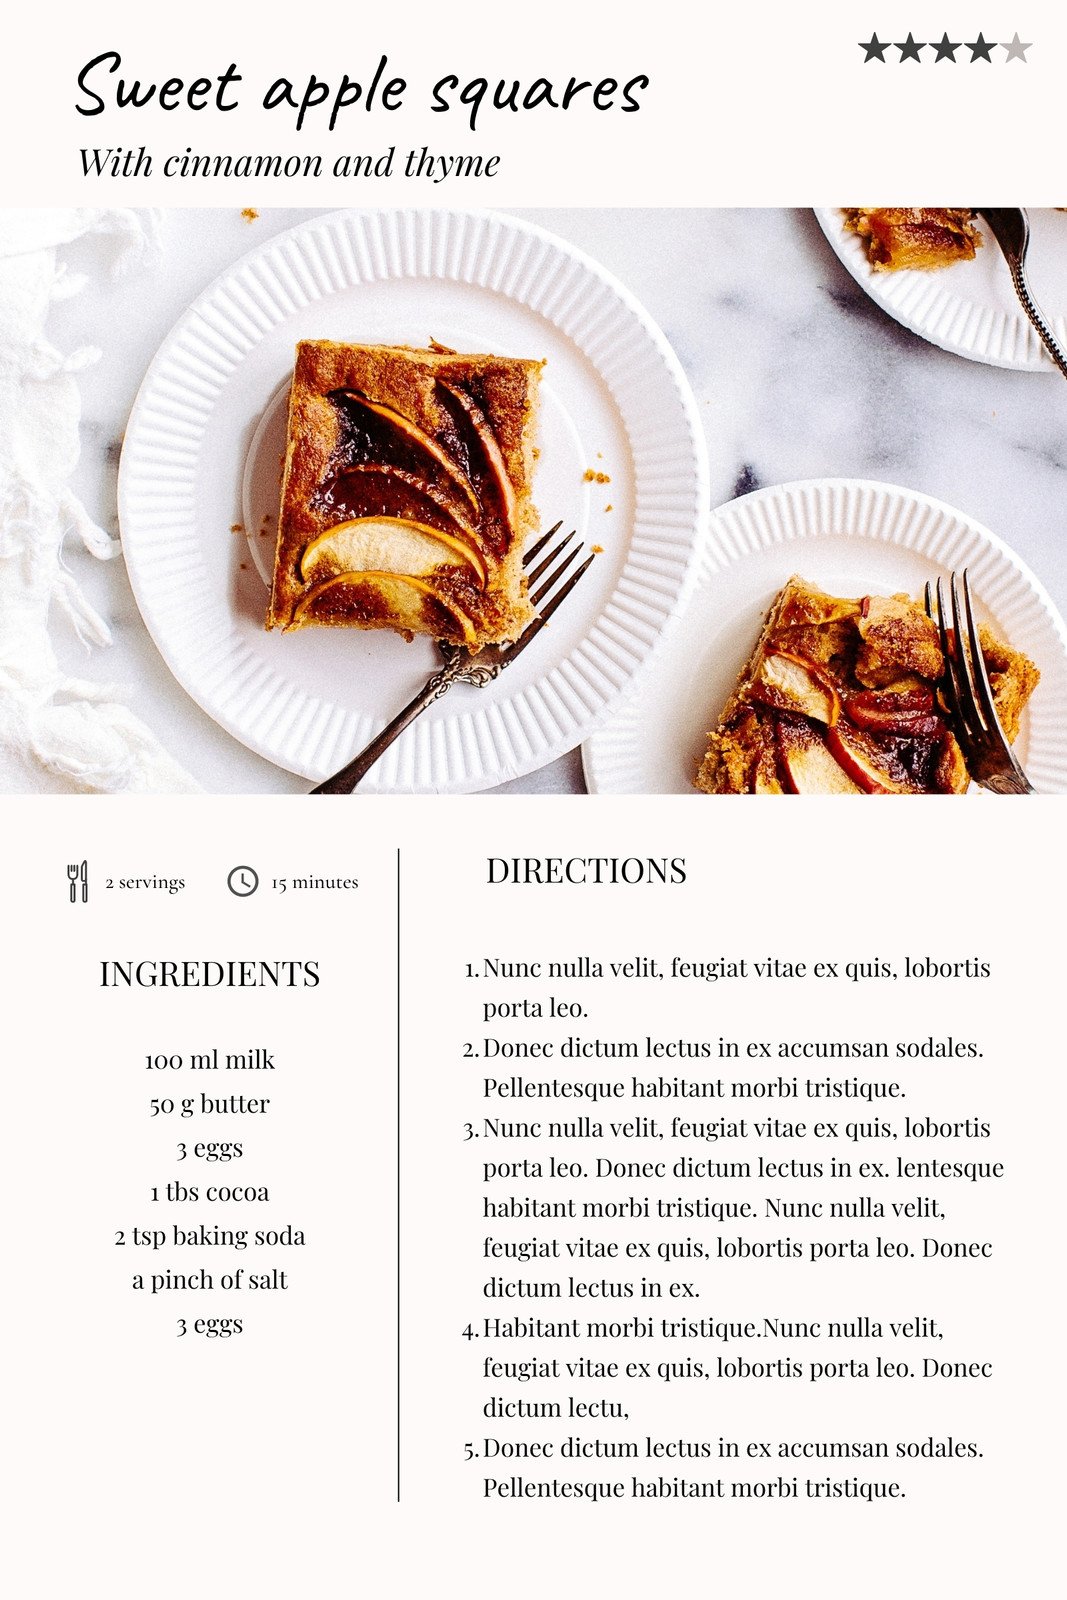 Print Your Own Recipe Cards! - A Beautiful Mess